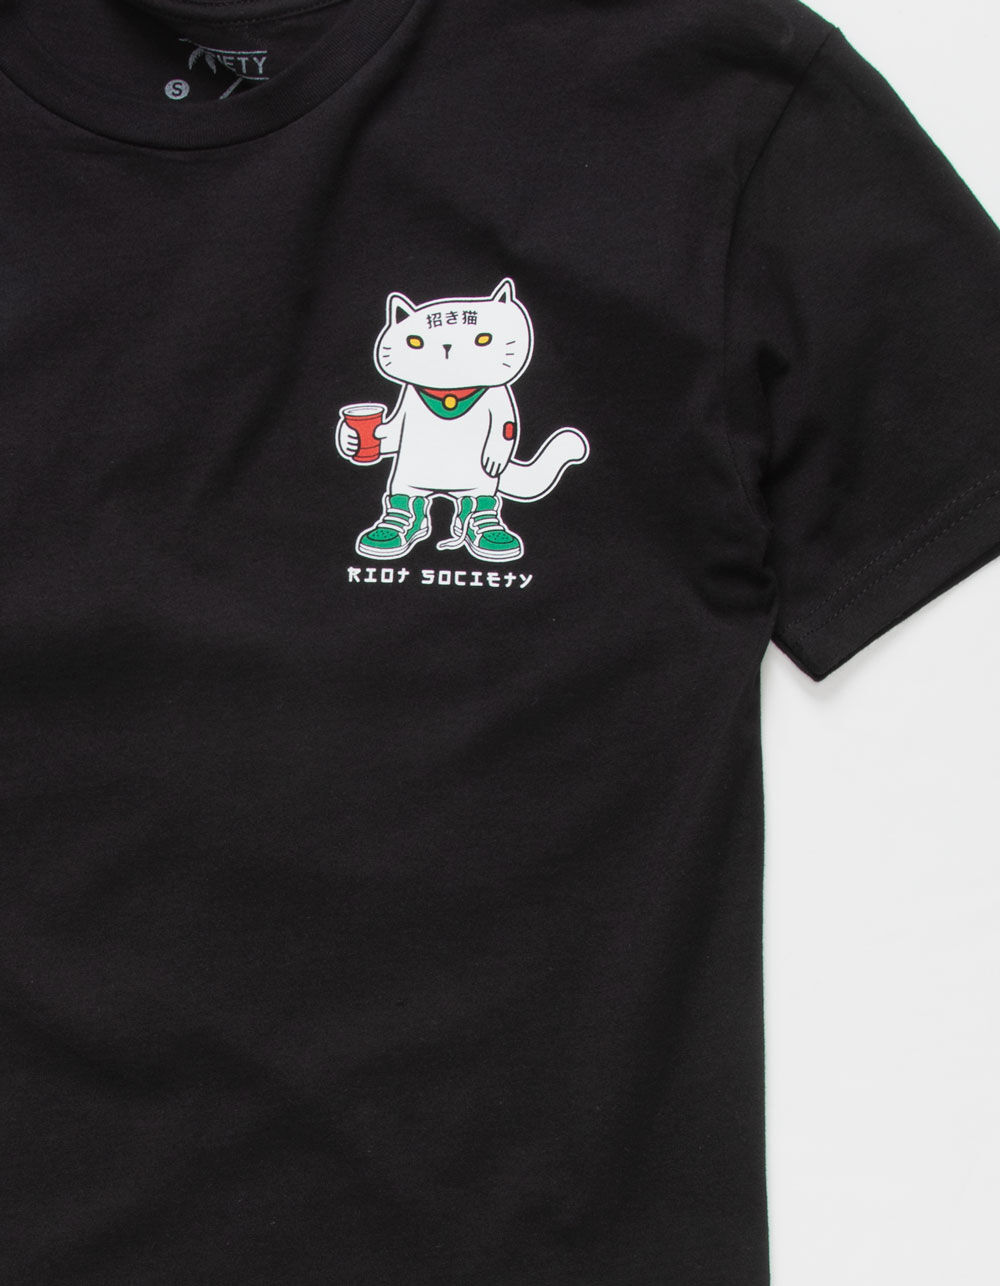 RIOT SOCIETY x Sugee Cat Mens Tee - BLACK | Tillys